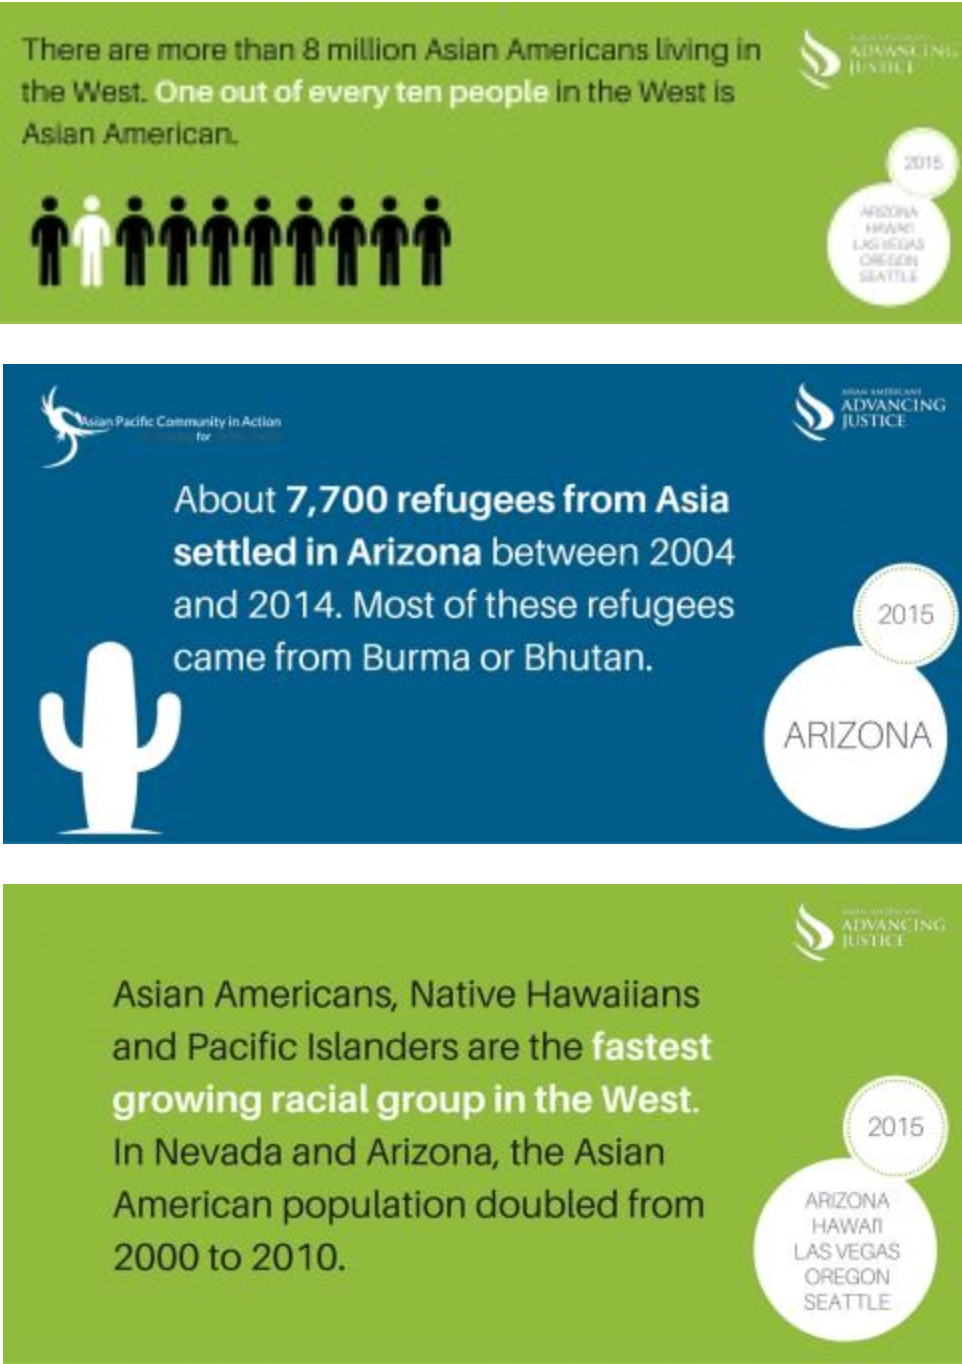 A Community of Contrasts: Asian Americans, Native Hawaiians and Pacific Islanders in the West, 2015